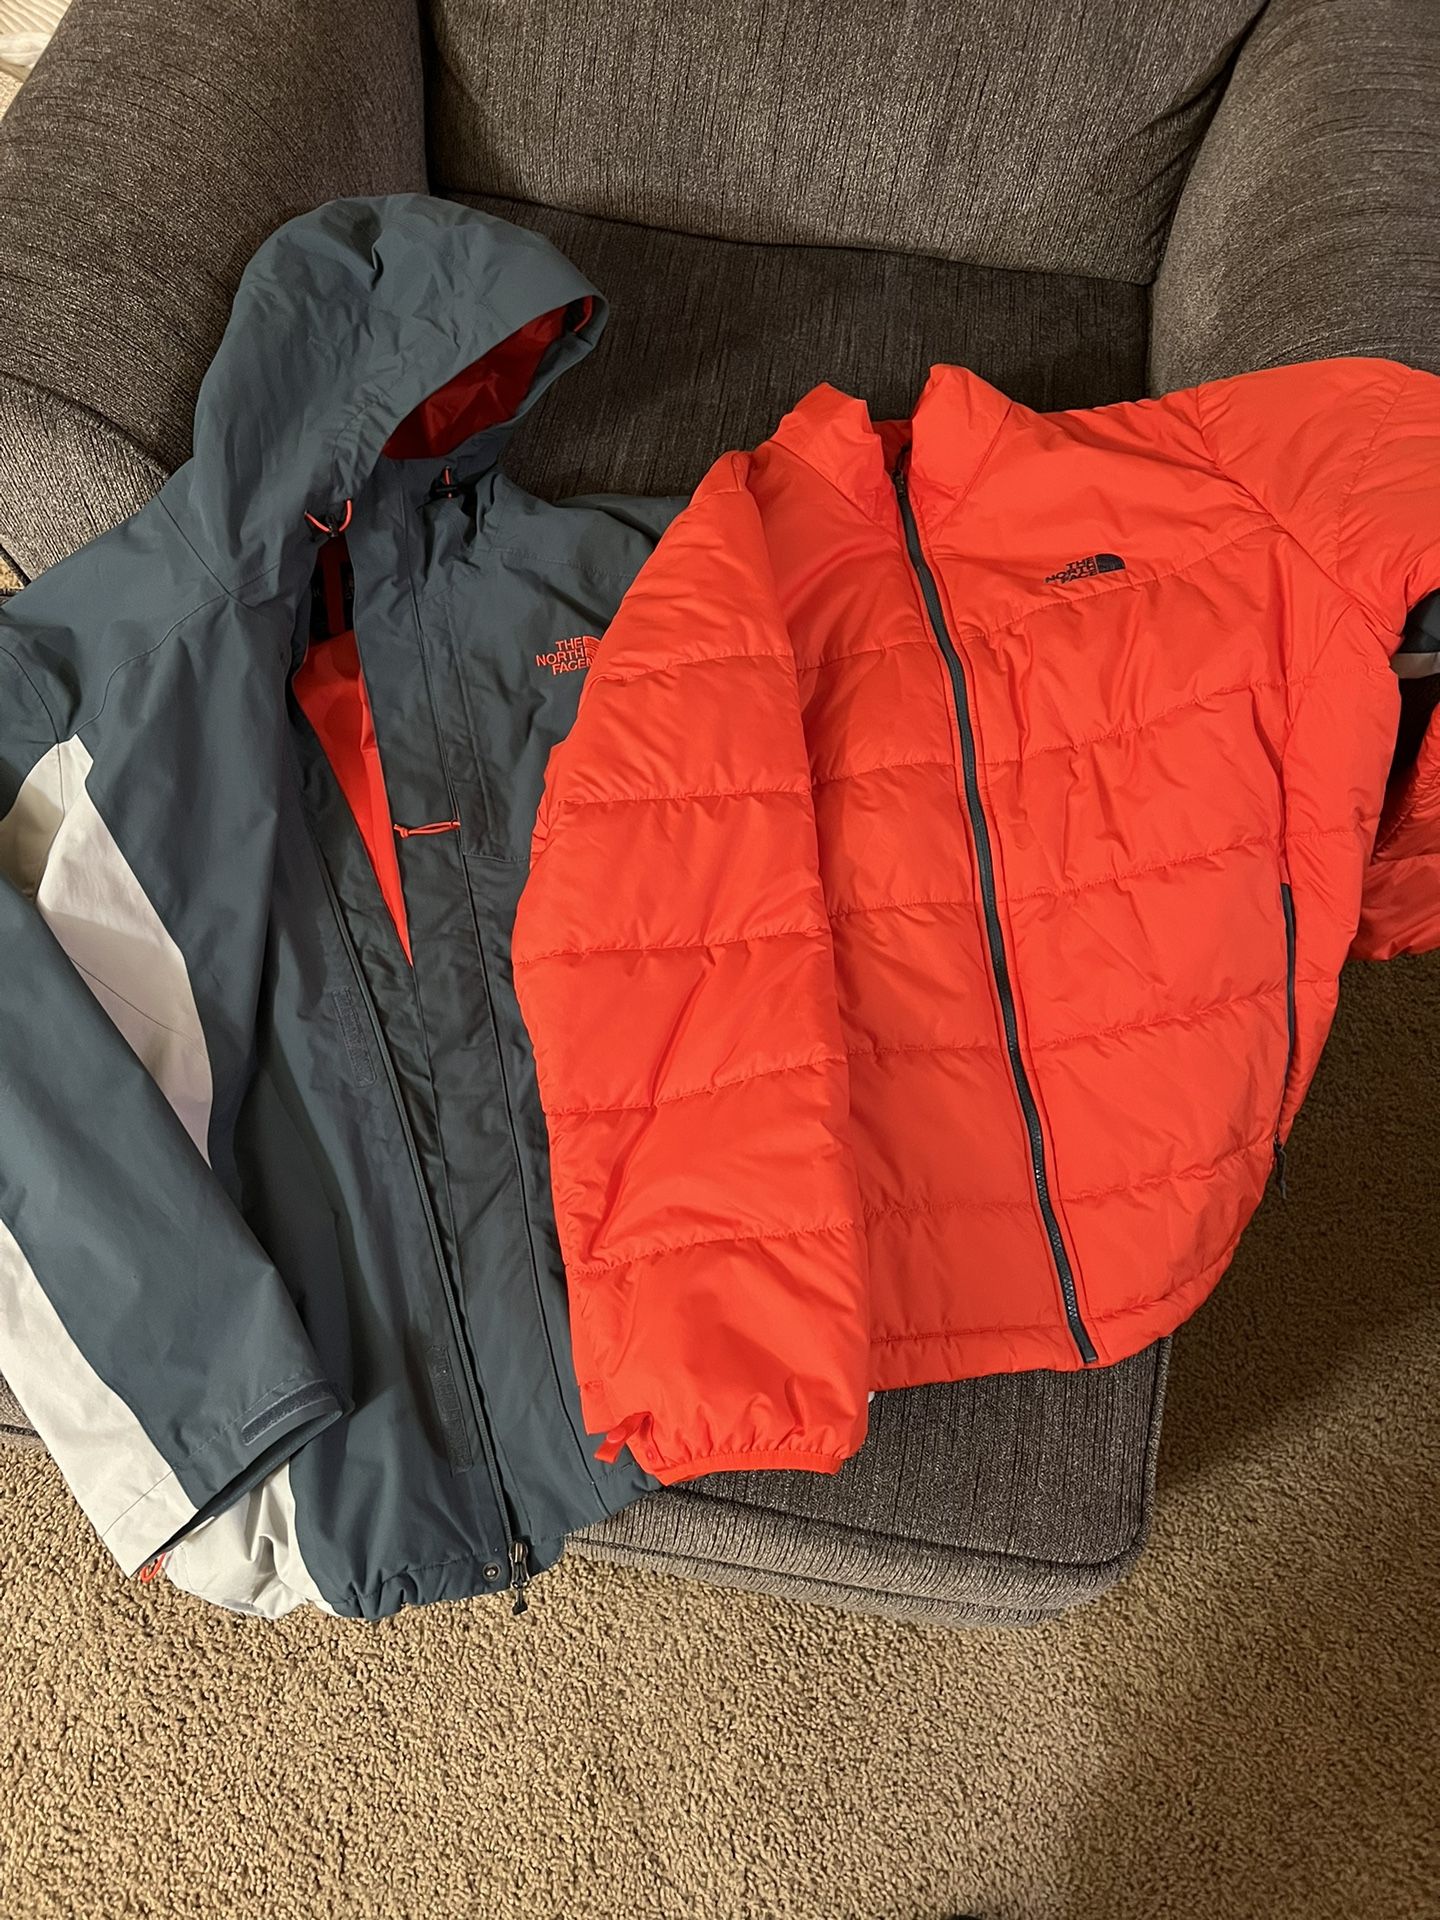 North Face 2 In 1 Jacket 